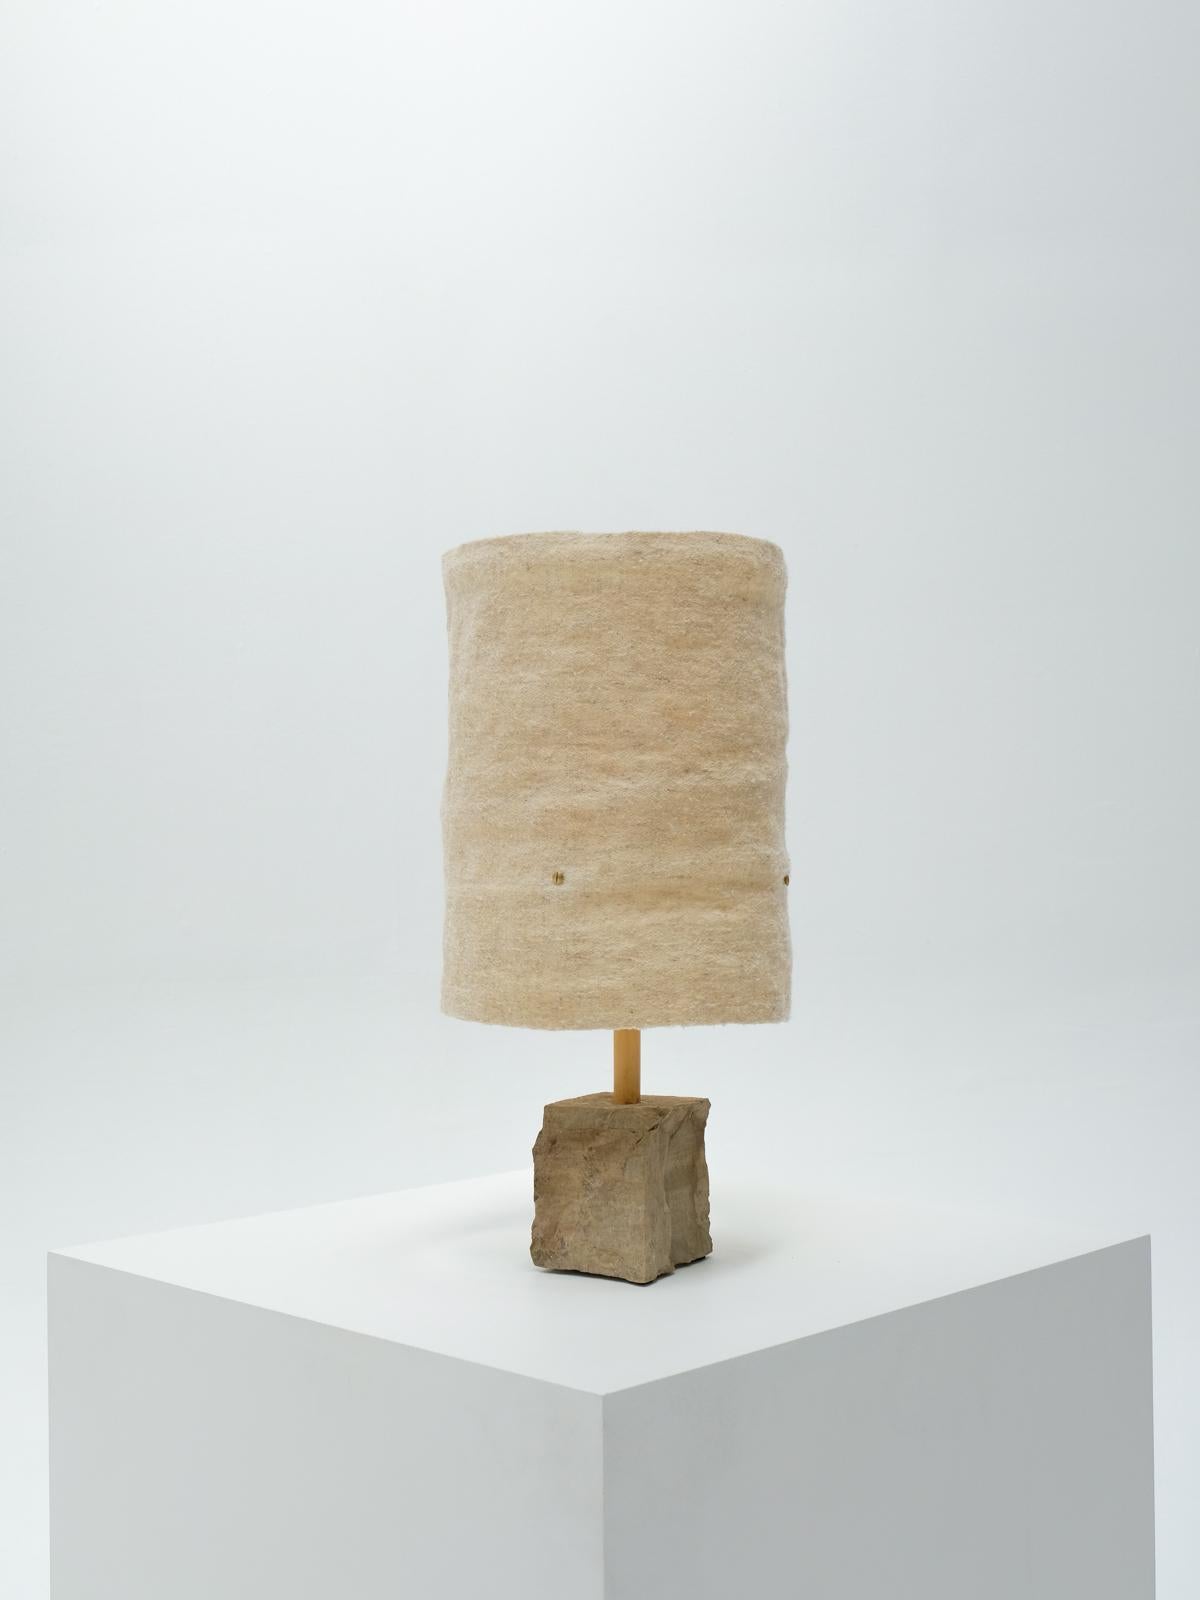 Moroccan Hjra Table Lamp, Handspun and Handwoven wool lampshade, Made of Rock and Reed For Sale